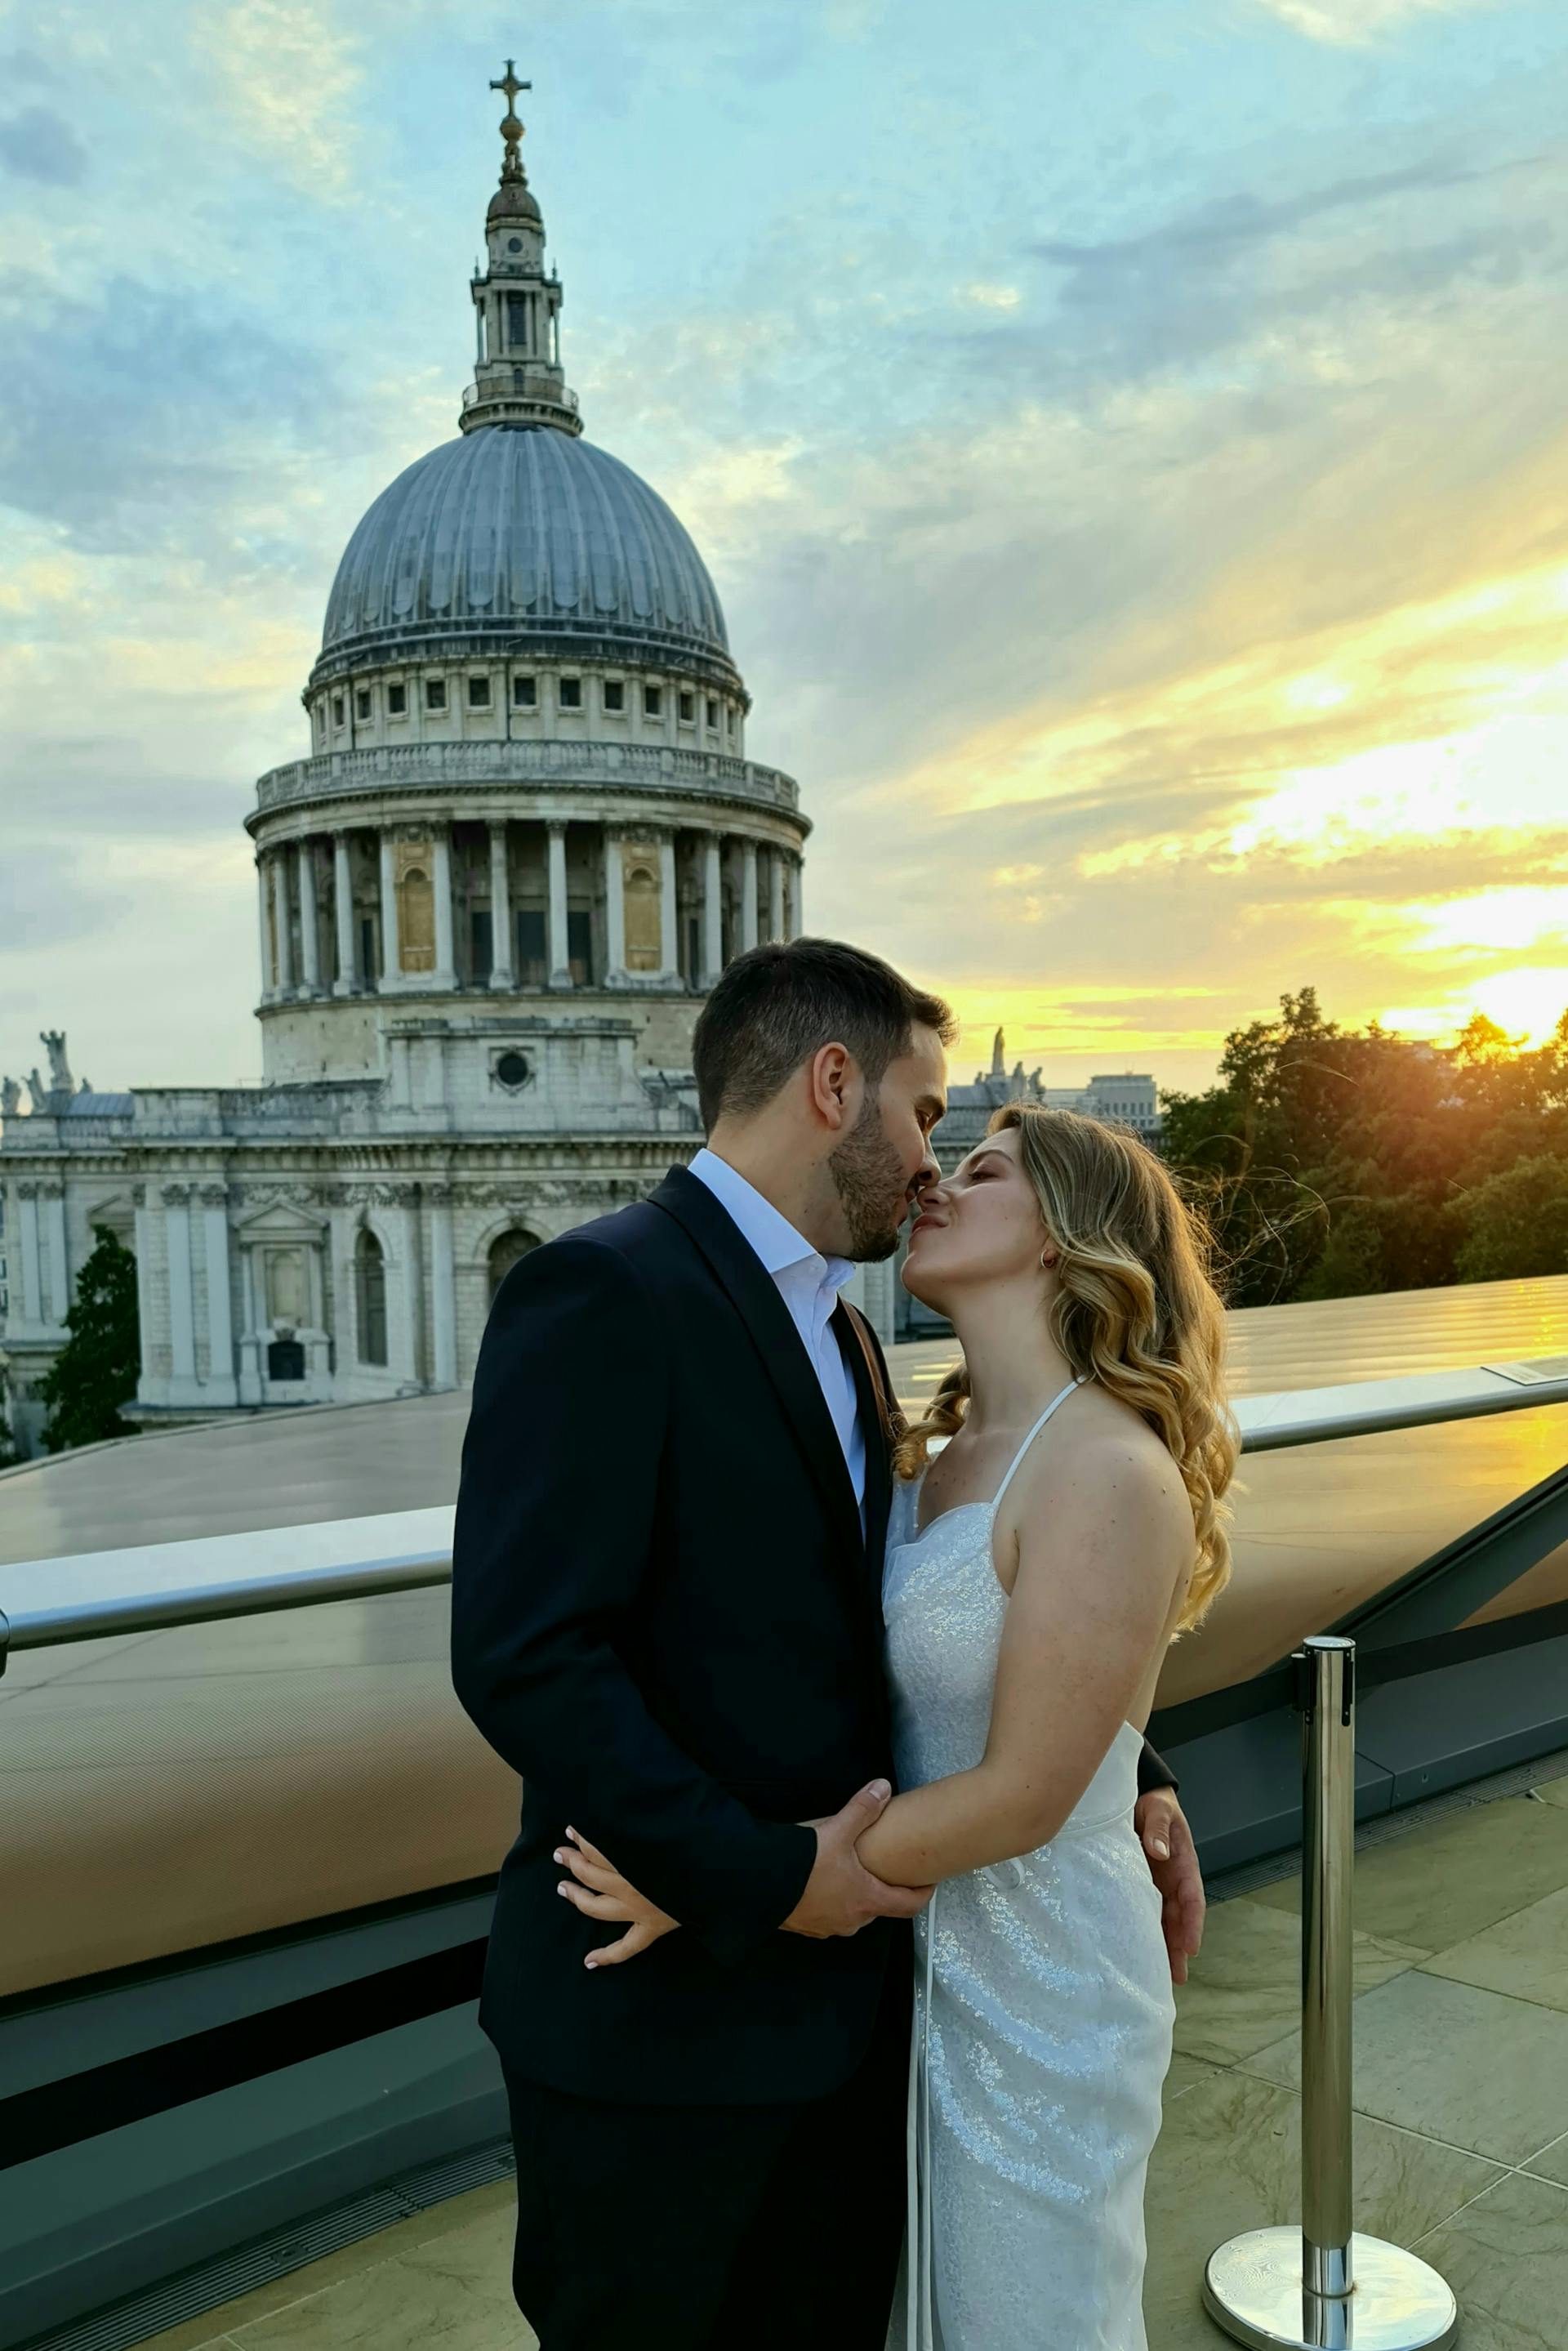 A man and woman about to kiss with a picturesque view in the background | Source: Pexels